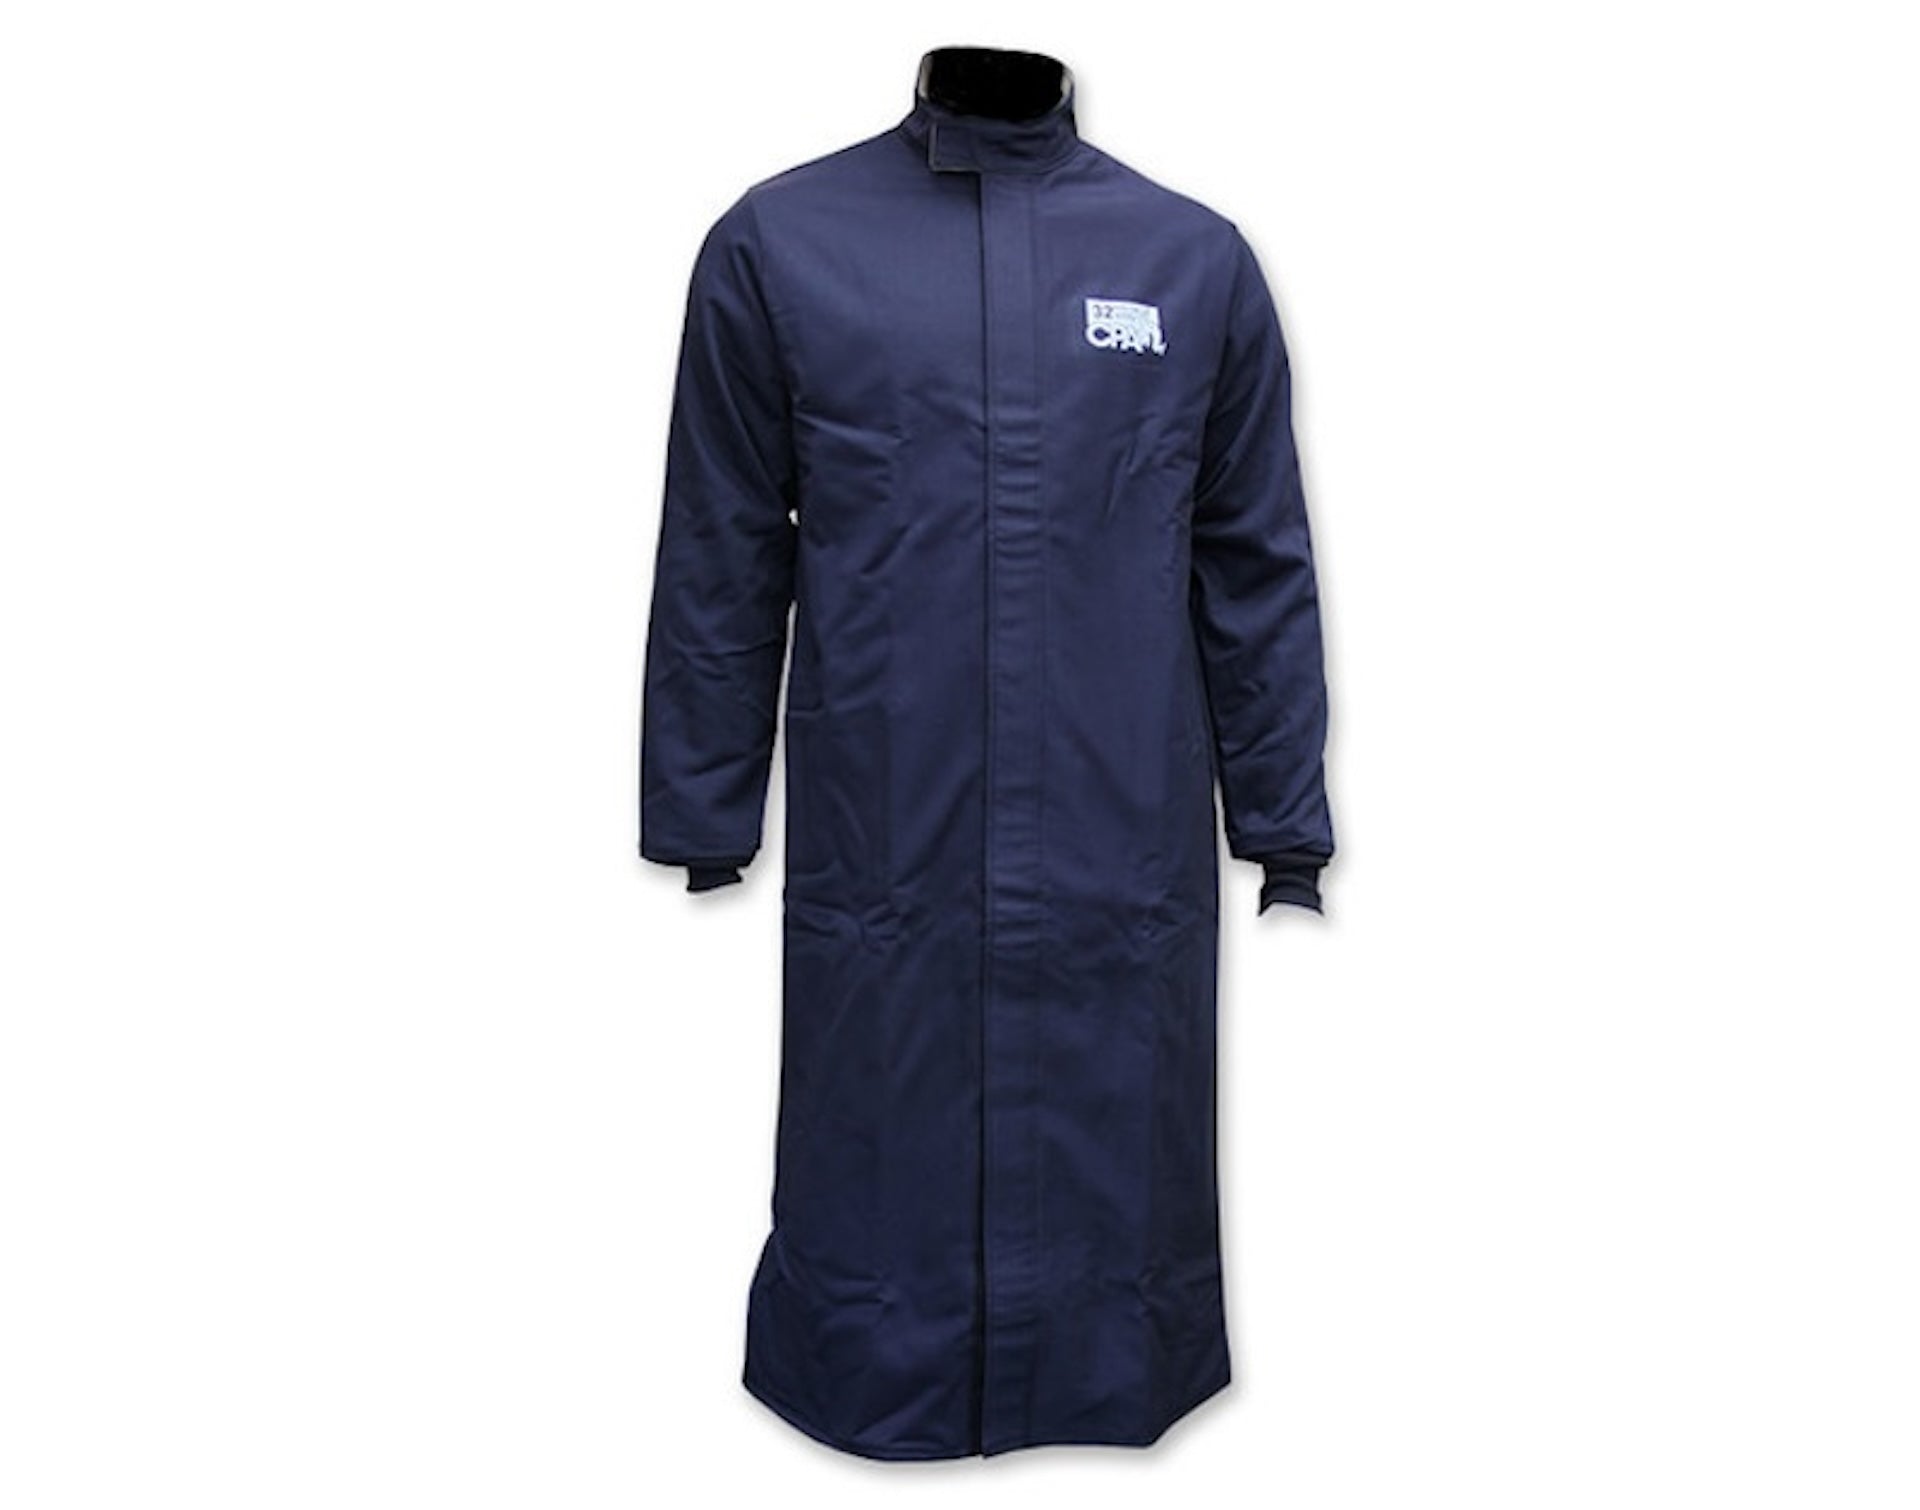 Chicago Protective Apparel SWC-43 Switchpullers Apparel 3-Ply Ultra Soft ATPV 43 Cal 50” Arc Coat, Navy, 1 Each